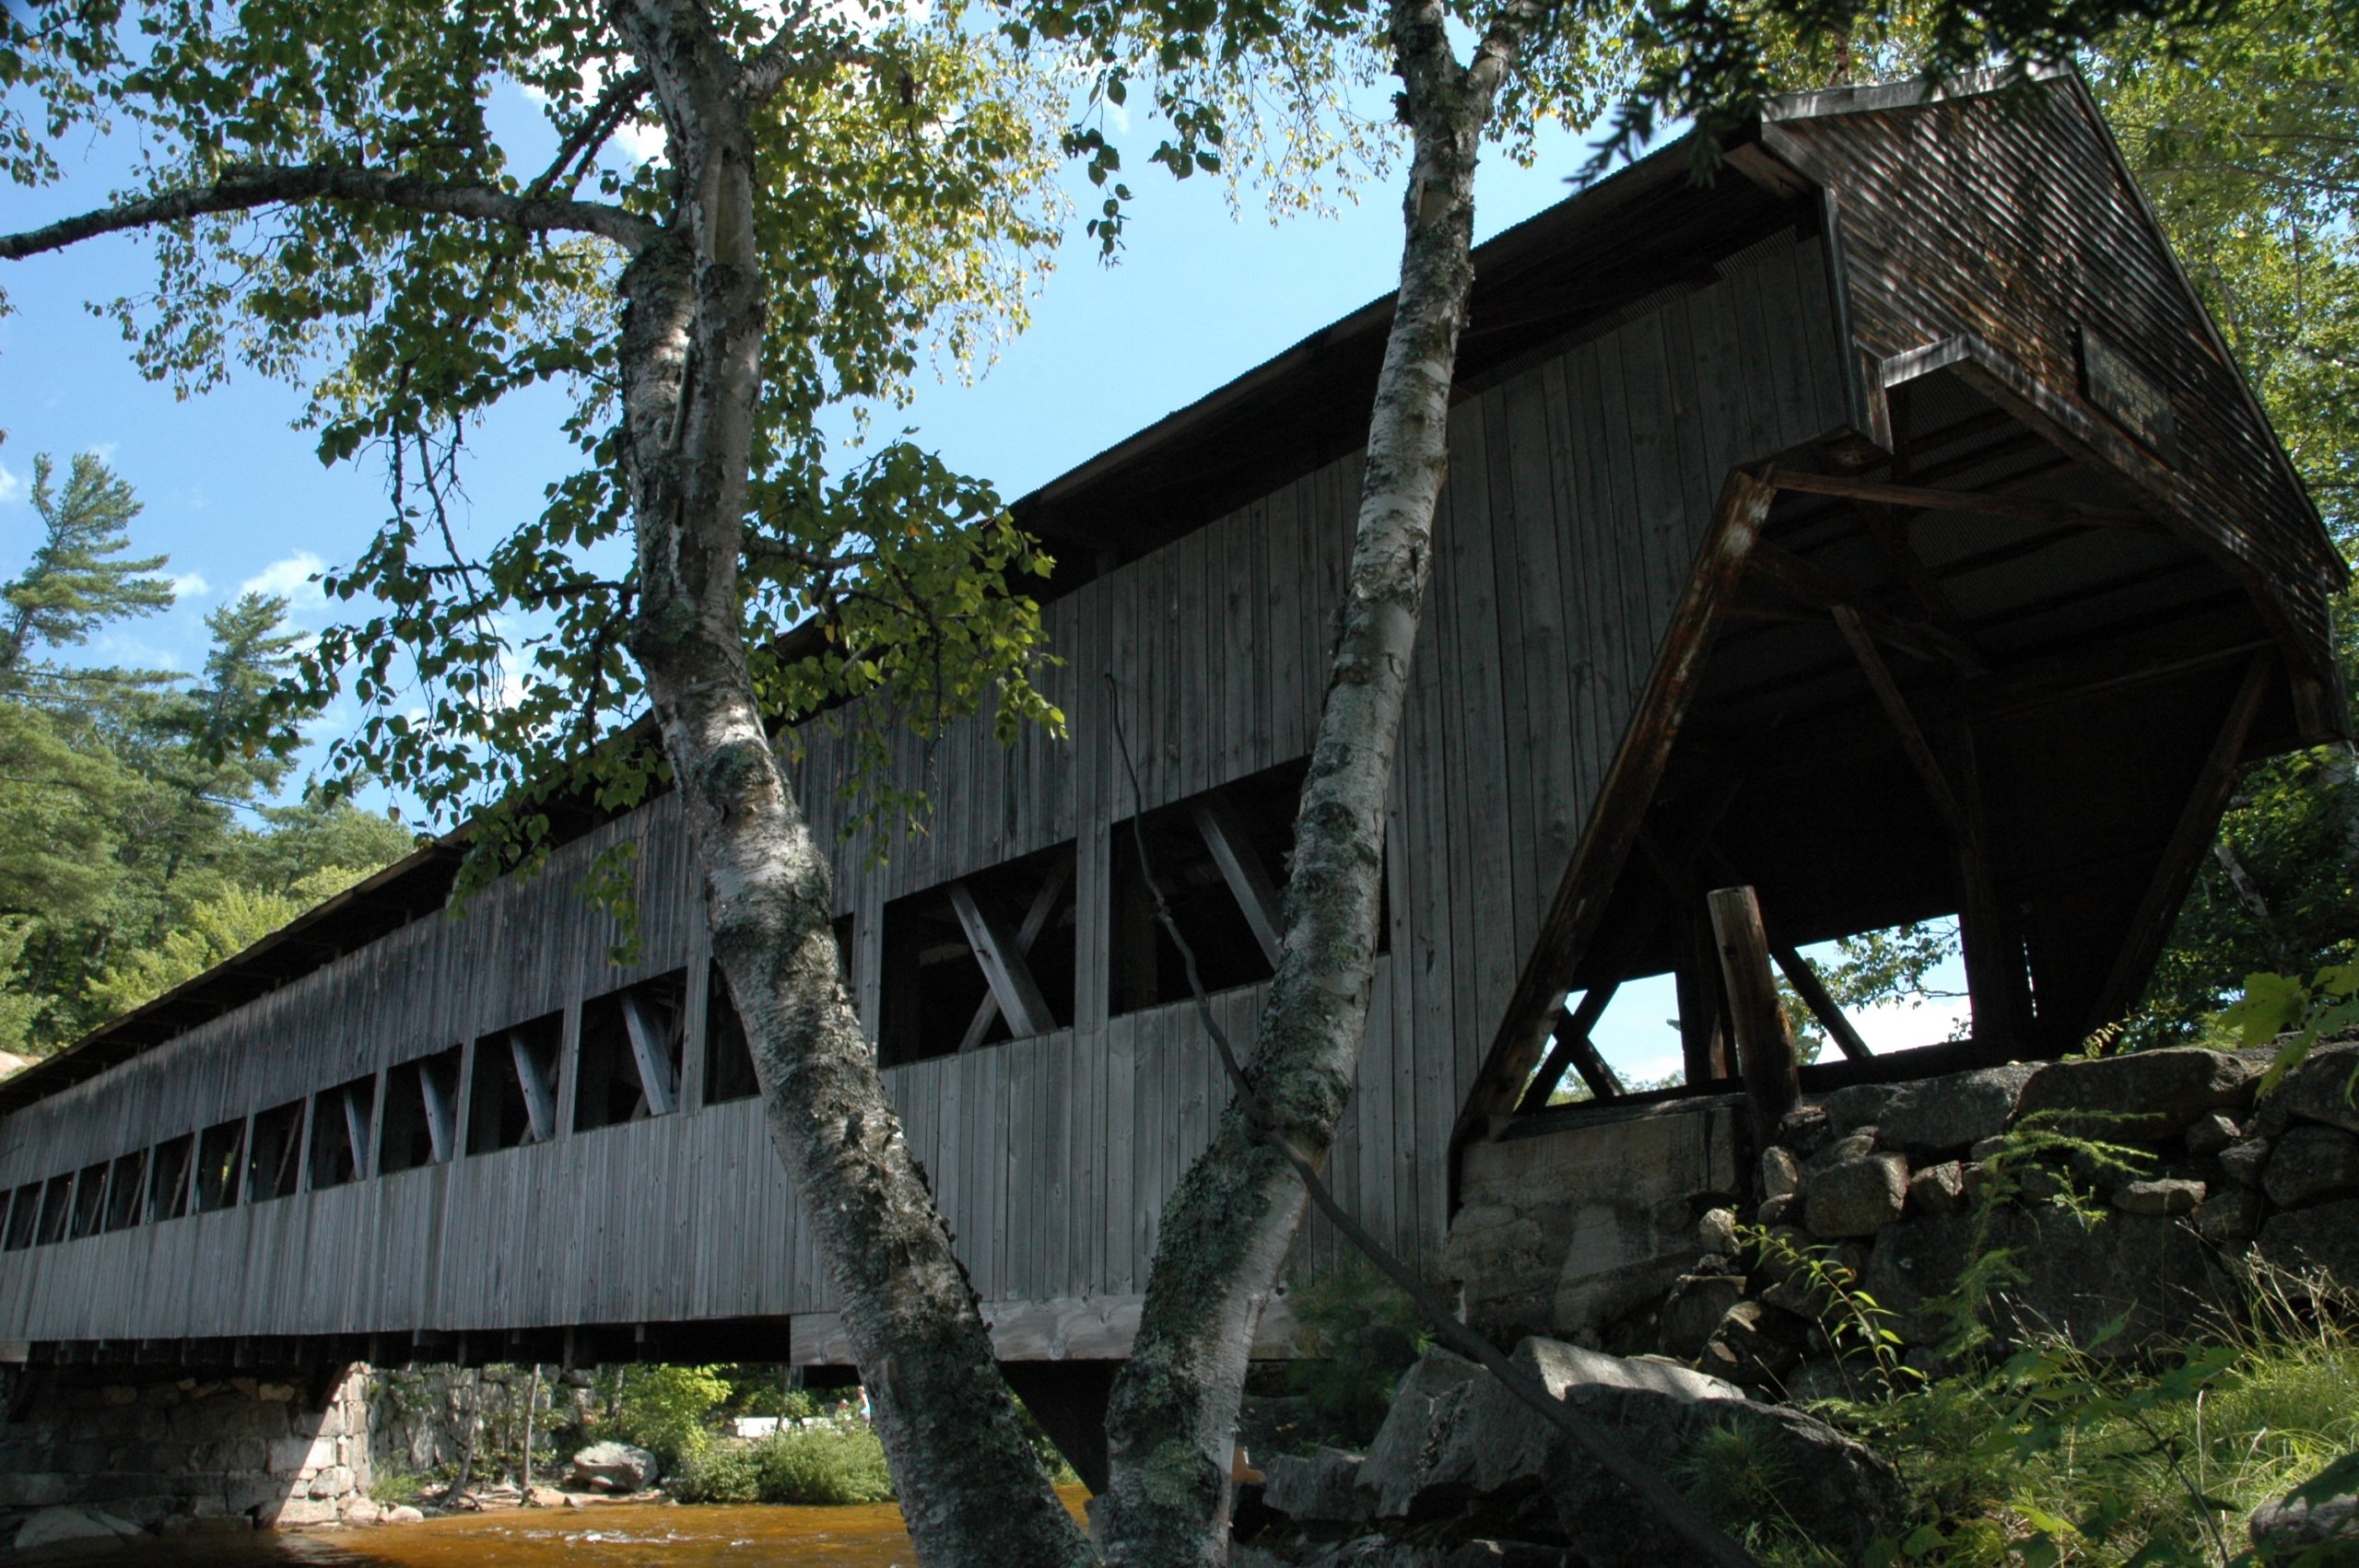 Albany Covered Bridge (user submitted)